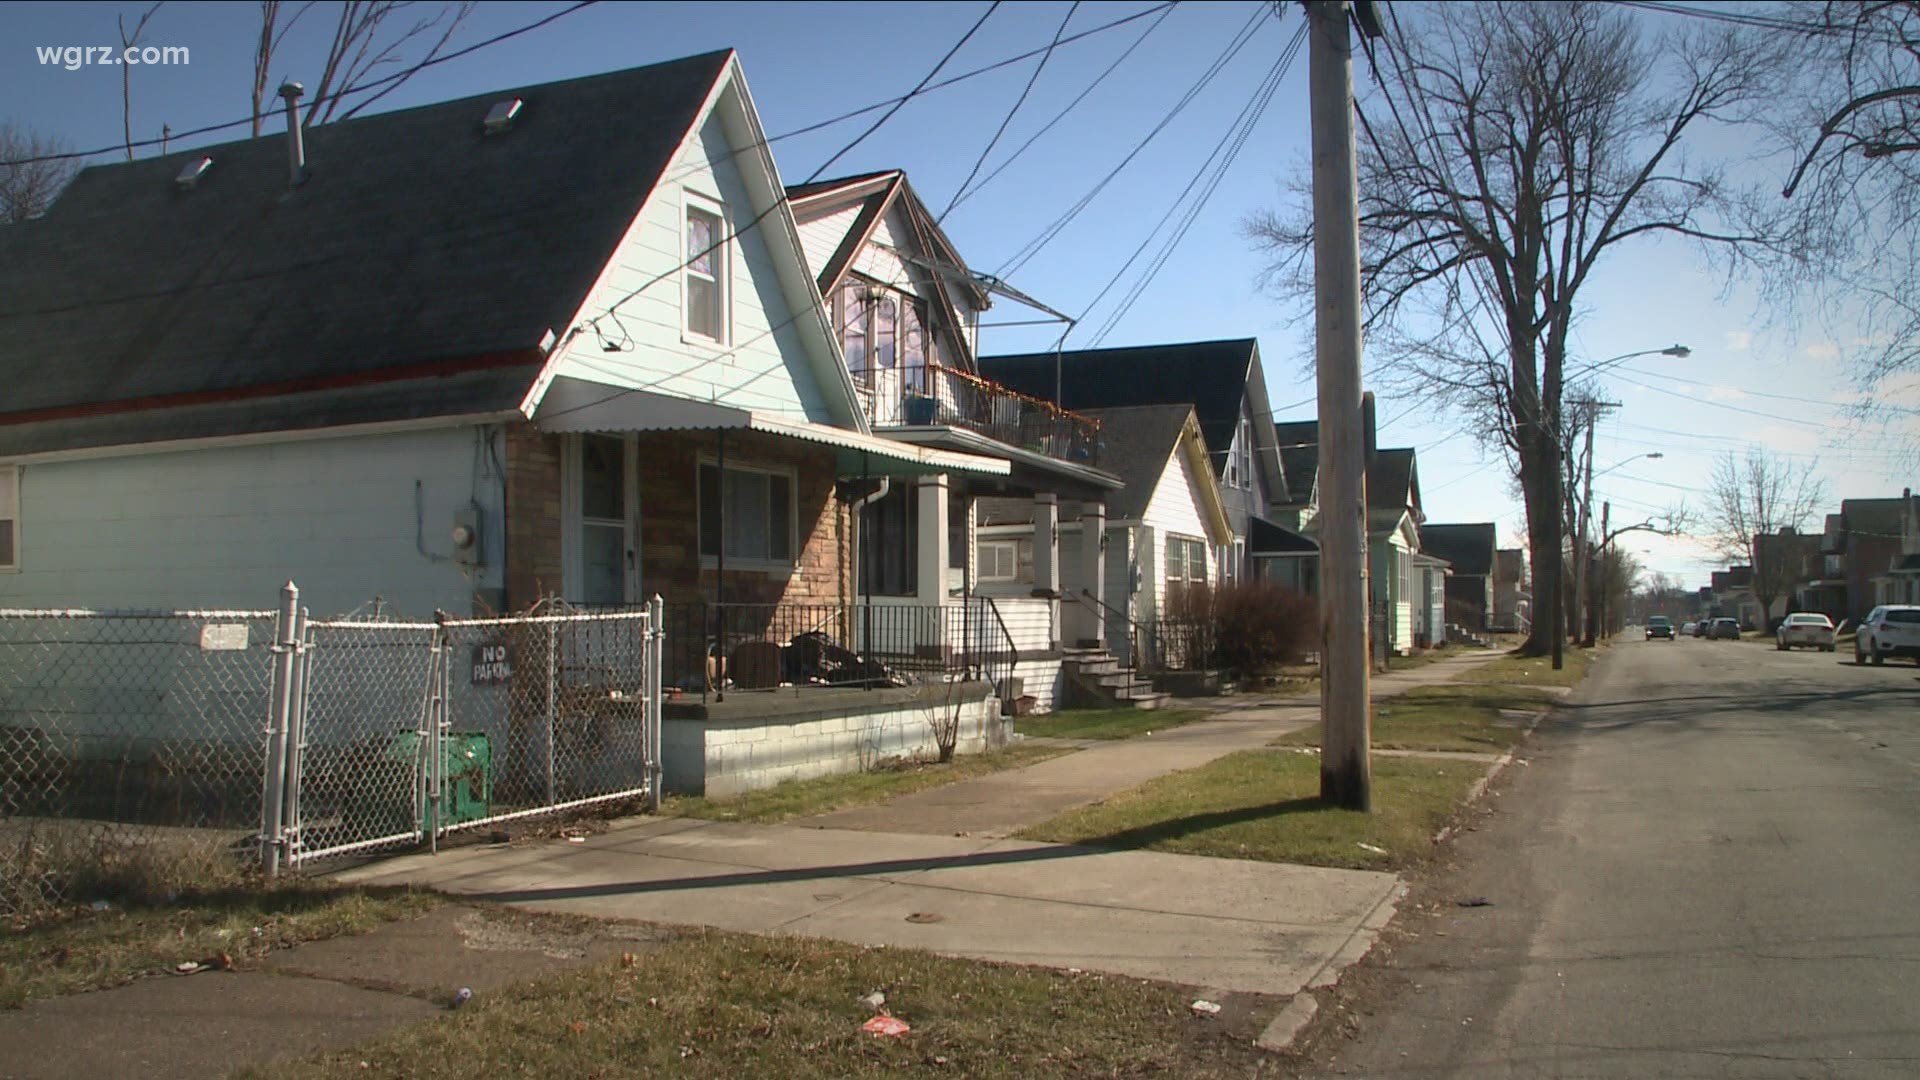 One person was shot to death on Johnson Street in Buffalo. Police say it happened overnight in the 200 block of Johnson.